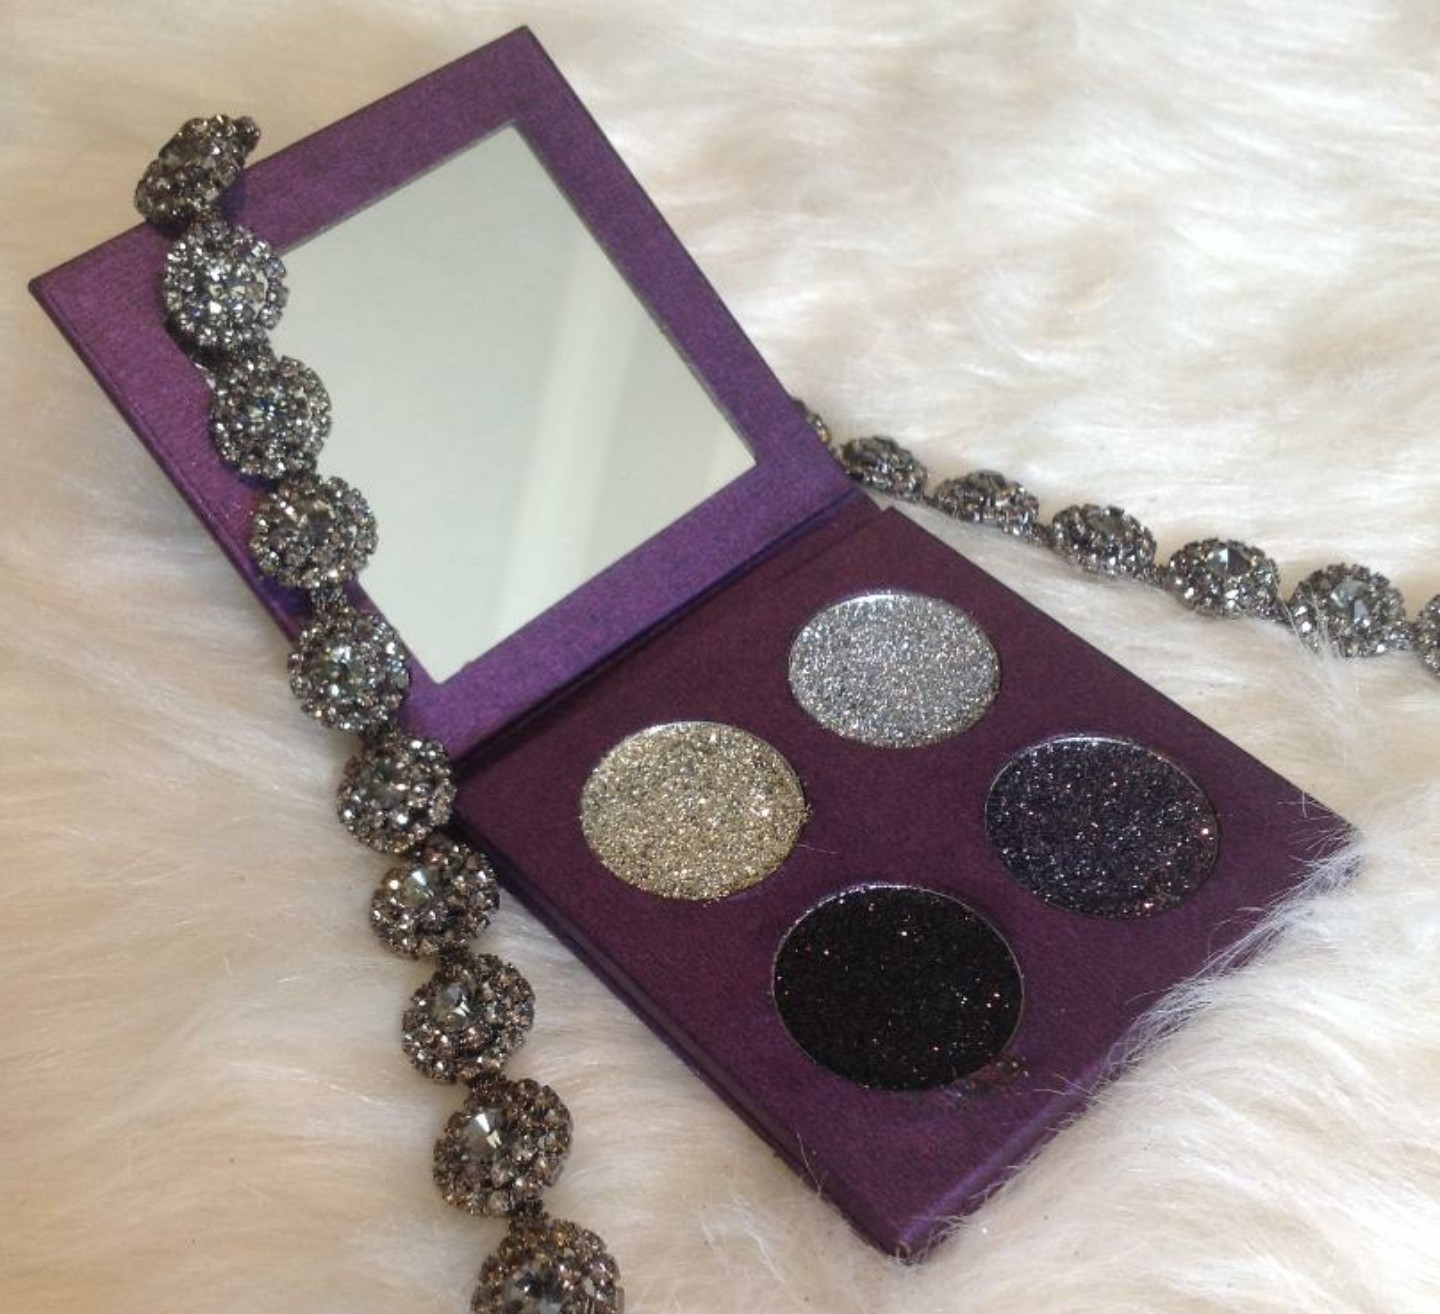 Primary image for 4 26 mm Jaw Dropping Hand Pressed Silver & Black Tone Glitter Eyeshadow